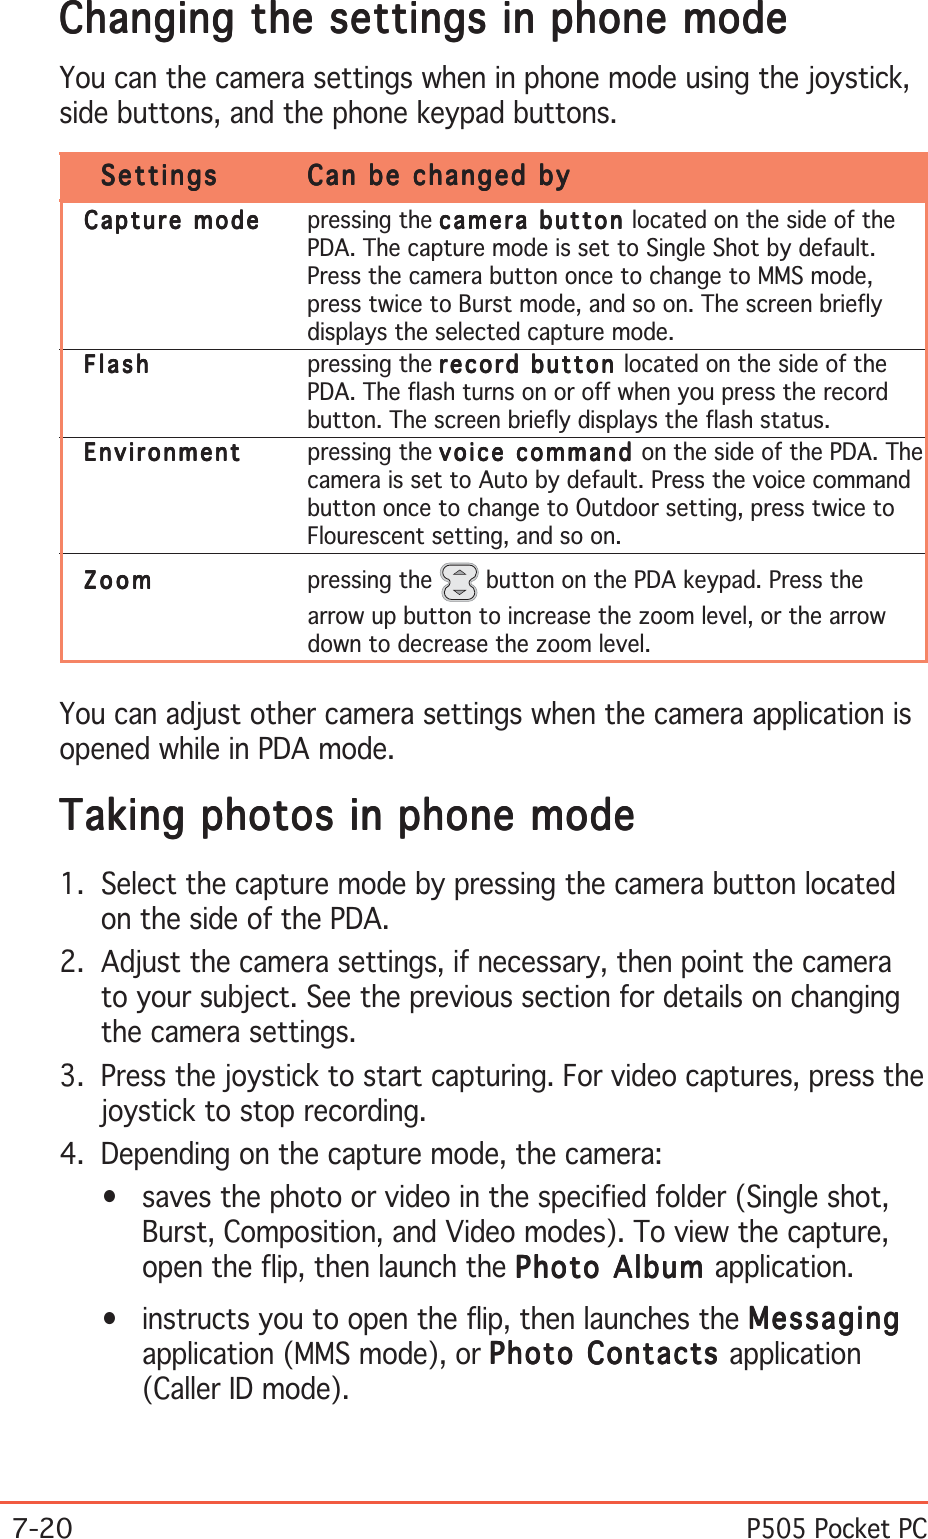 7-20P505 Pocket PCChanging the settings in phone modeChanging the settings in phone modeChanging the settings in phone modeChanging the settings in phone modeChanging the settings in phone modeYou can the camera settings when in phone mode using the joystick,side buttons, and the phone keypad buttons.SettingsSettingsSettingsSettingsSettings Can be changed byCan be changed byCan be changed byCan be changed byCan be changed byCapture modeCapture modeCapture modeCapture modeCapture mode pressing the camera button camera button camera button camera button c a mera   b u t t o n  located on the side of thePDA. The capture mode is set to Single Shot by default.Press the camera button once to change to MMS mode,press twice to Burst mode, and so on. The screen brieflydisplays the selected capture mode.FlashFlashFlashFlashFlash pressing the record button record button record button record button r e c o r d   b u t t o n  located on the side of thePDA. The flash turns on or off when you press the recordbutton. The screen briefly displays the flash status.EnvironmentEnvironmentEnvironmentEnvironmentEnvironment pressing the voice command voice command voice command voice command voice  command on the side of the PDA. Thecamera is set to Auto by default. Press the voice commandbutton once to change to Outdoor setting, press twice toFlourescent setting, and so on.ZoomZoomZoomZoomZoom pressing the   button on the PDA keypad. Press thearrow up button to increase the zoom level, or the arrowdown to decrease the zoom level.You can adjust other camera settings when the camera application isopened while in PDA mode.Taking photos in phone modeTaking photos in phone modeTaking photos in phone modeTaking photos in phone modeTaking photos in phone mode1. Select the capture mode by pressing the camera button locatedon the side of the PDA.2. Adjust the camera settings, if necessary, then point the camerato your subject. See the previous section for details on changingthe camera settings.3. Press the joystick to start capturing. For video captures, press thejoystick to stop recording.4. Depending on the capture mode, the camera:• saves the photo or video in the specified folder (Single shot,Burst, Composition, and Video modes). To view the capture,open the flip, then launch the Photo Album Photo Album Photo Album Photo Album Photo Album application.• instructs you to open the flip, then launches the MessagingMessagingMessagingMessagingMessagingapplication (MMS mode), or Photo Contacts Photo Contacts Photo Contacts Photo Contacts Photo Contacts application(Caller ID mode).